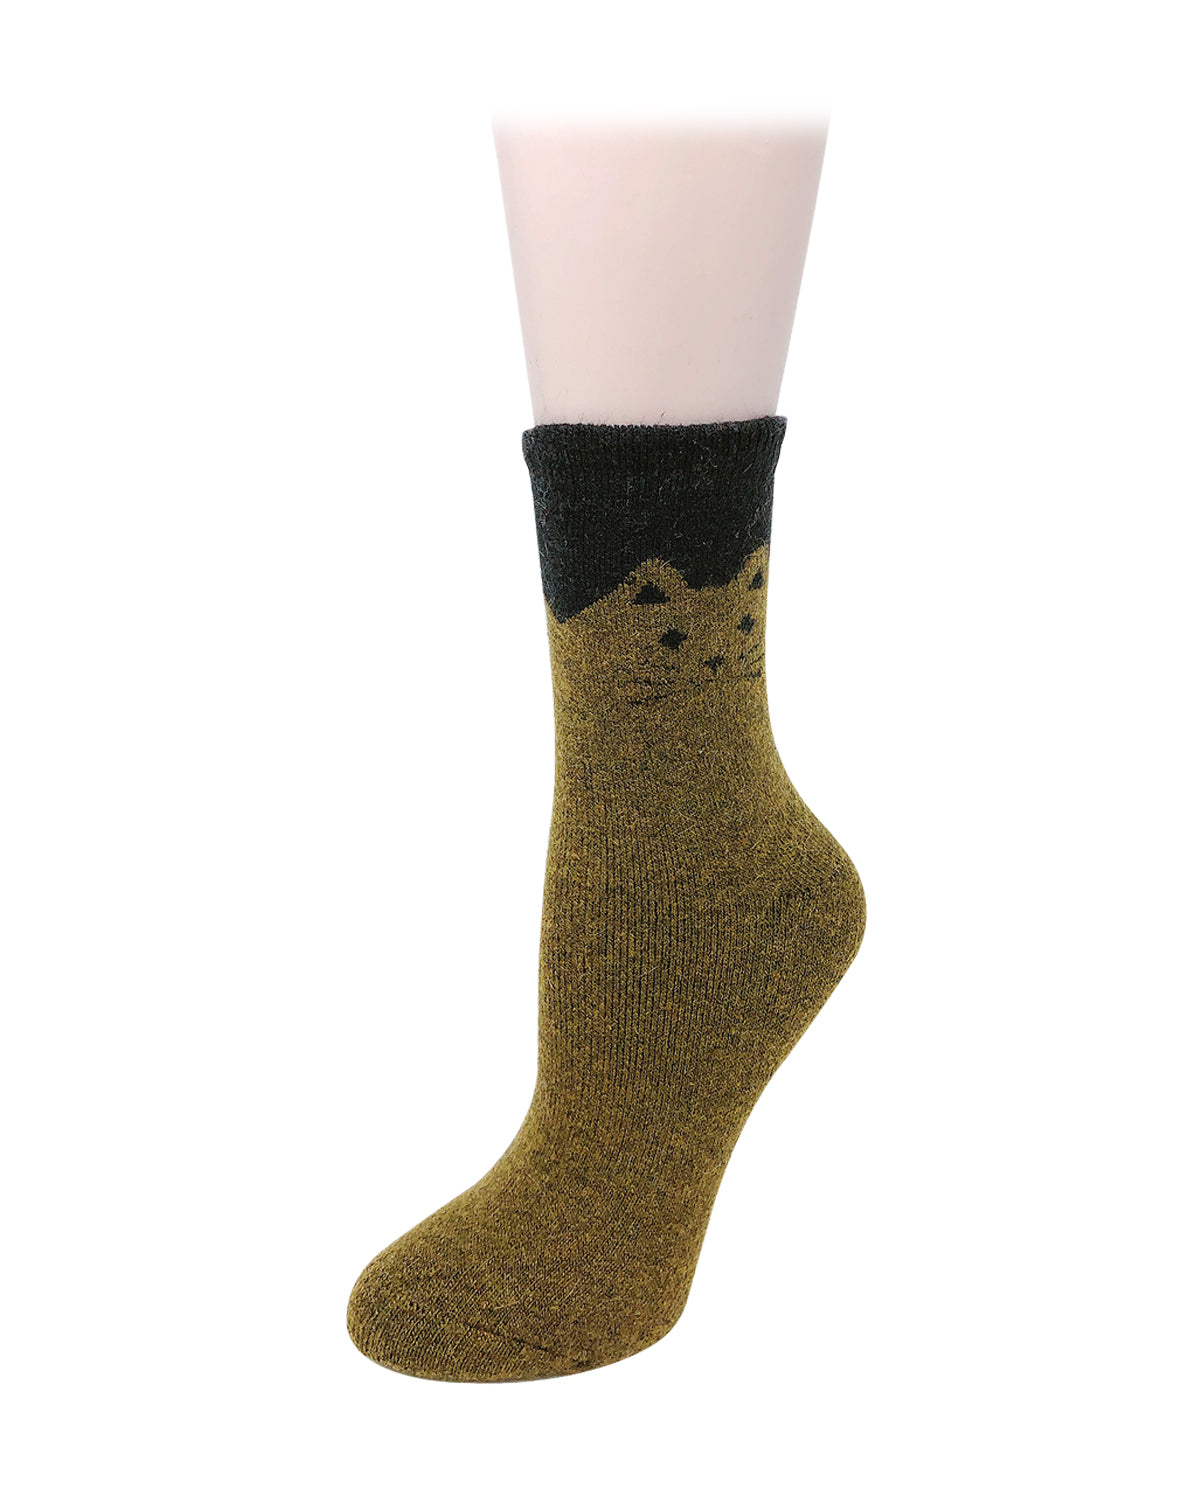 Wrapables Women's Thick Winter Warm Cat Print Wool Socks (Set of 5)